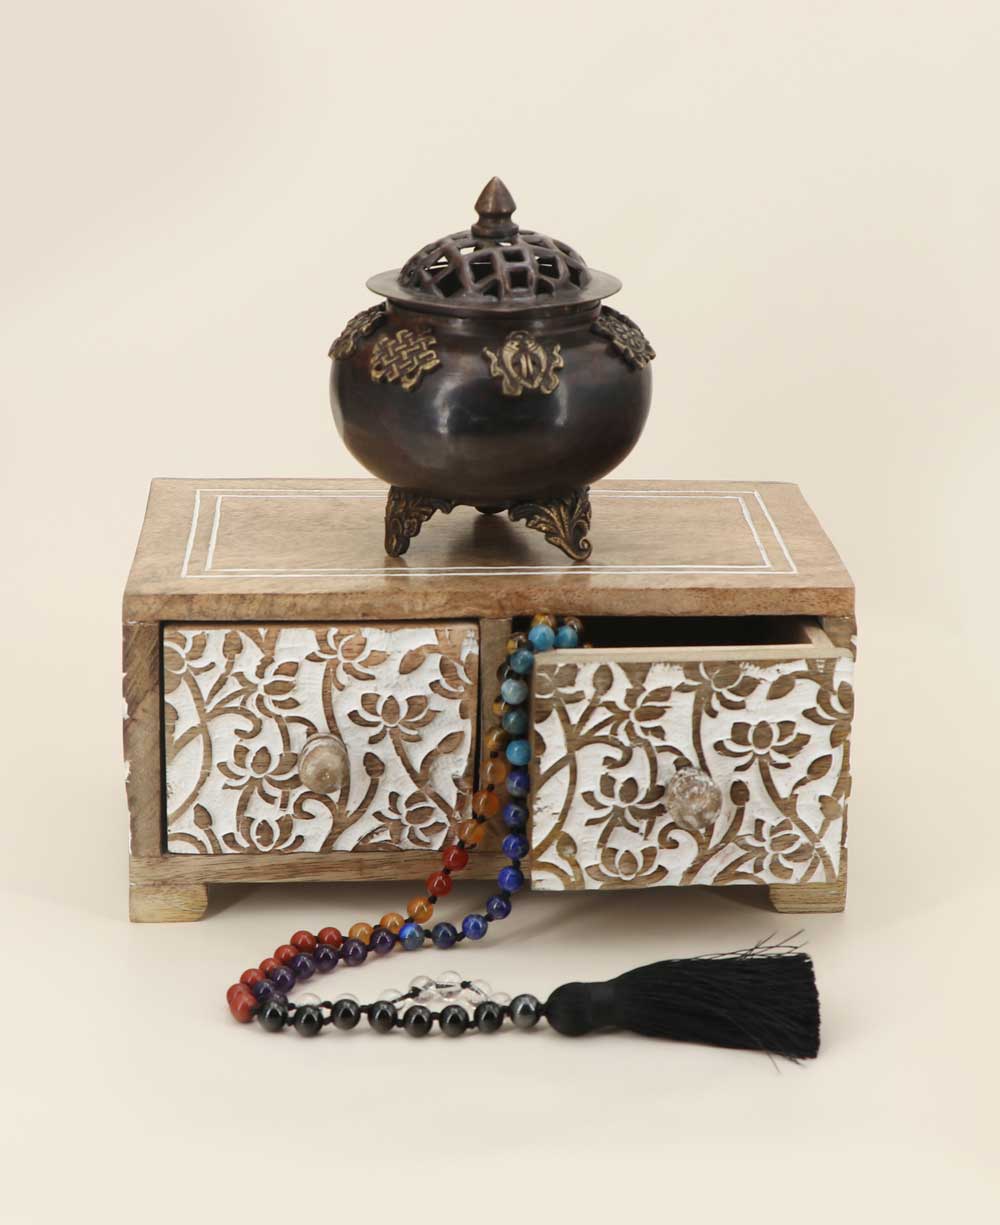 Small Tabletop Carved Wood Lotus Pedestal Riser With Drawers - Computer Risers & Stands - -